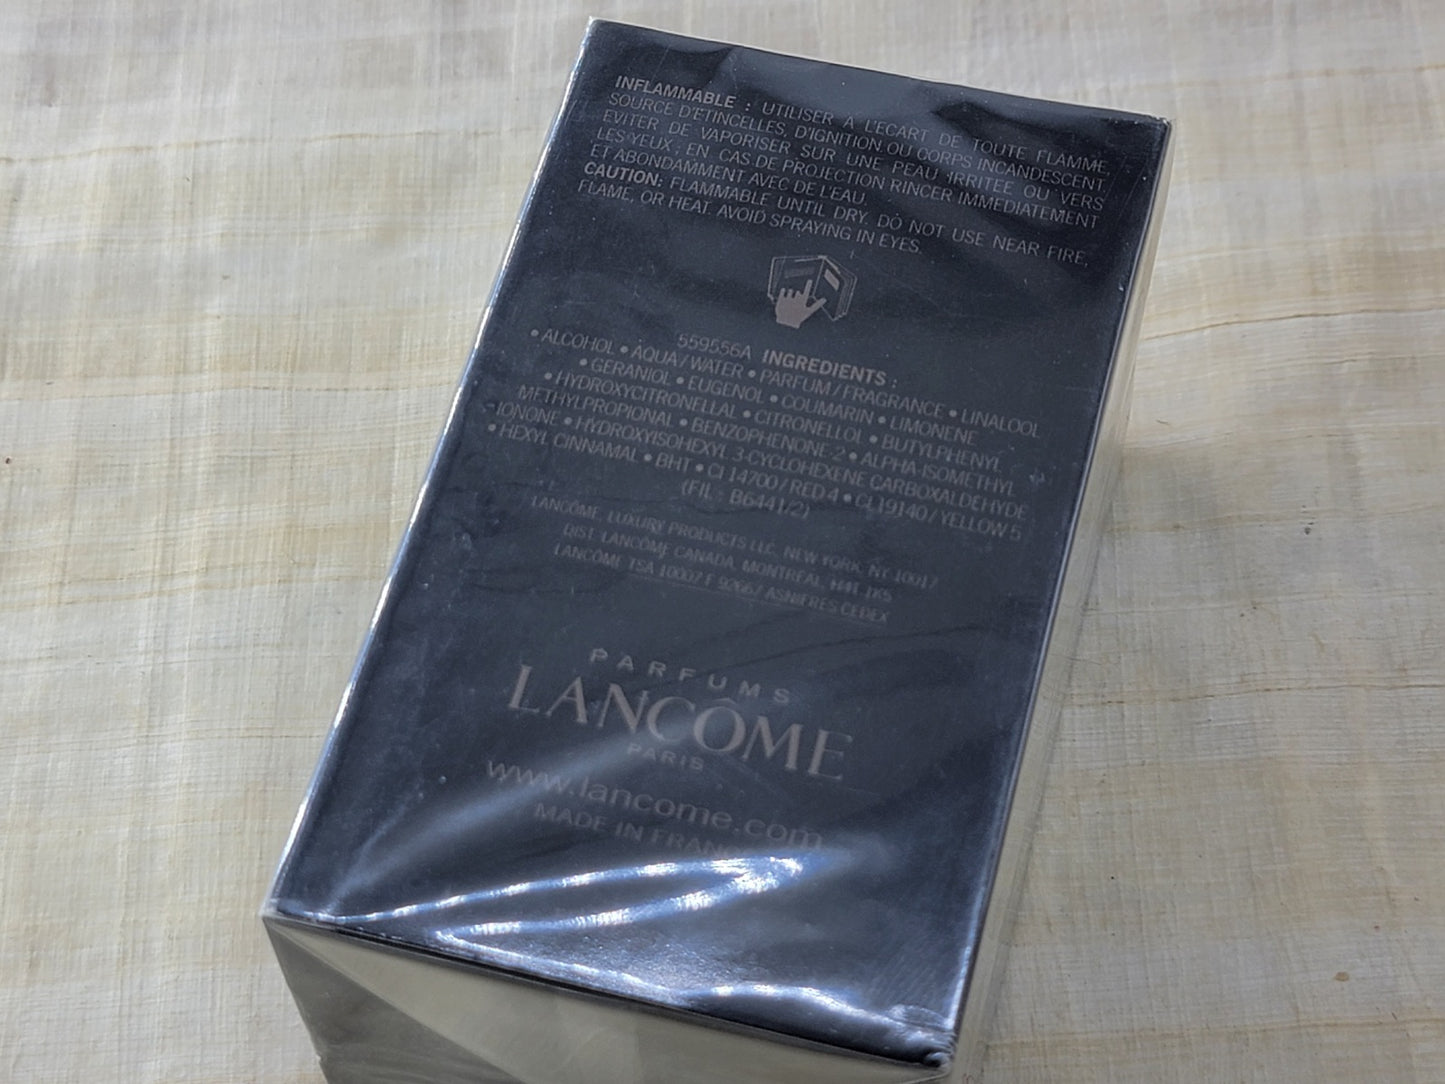 Miracle Homme Lancome EDT Spray 75 ml 2.5 oz OR 50 ml 1.7 oz Or Aftershave 100 ml, Vintage, Rare, Sealed